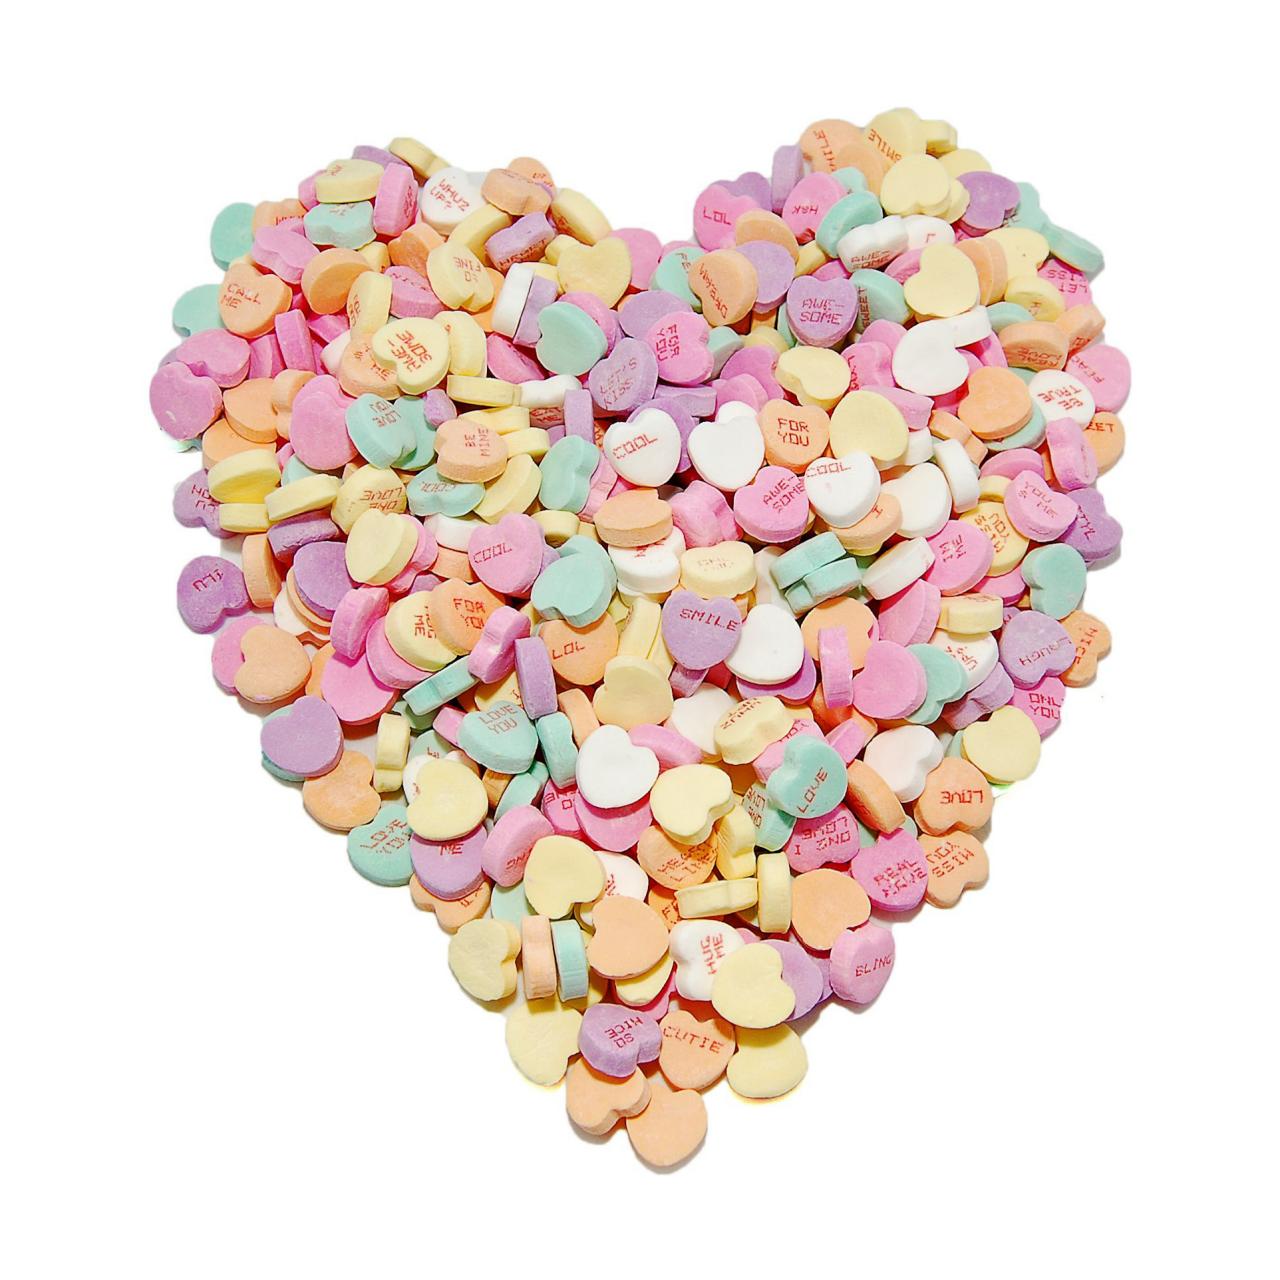 8 Things You Didn't Know About Conversation Hearts